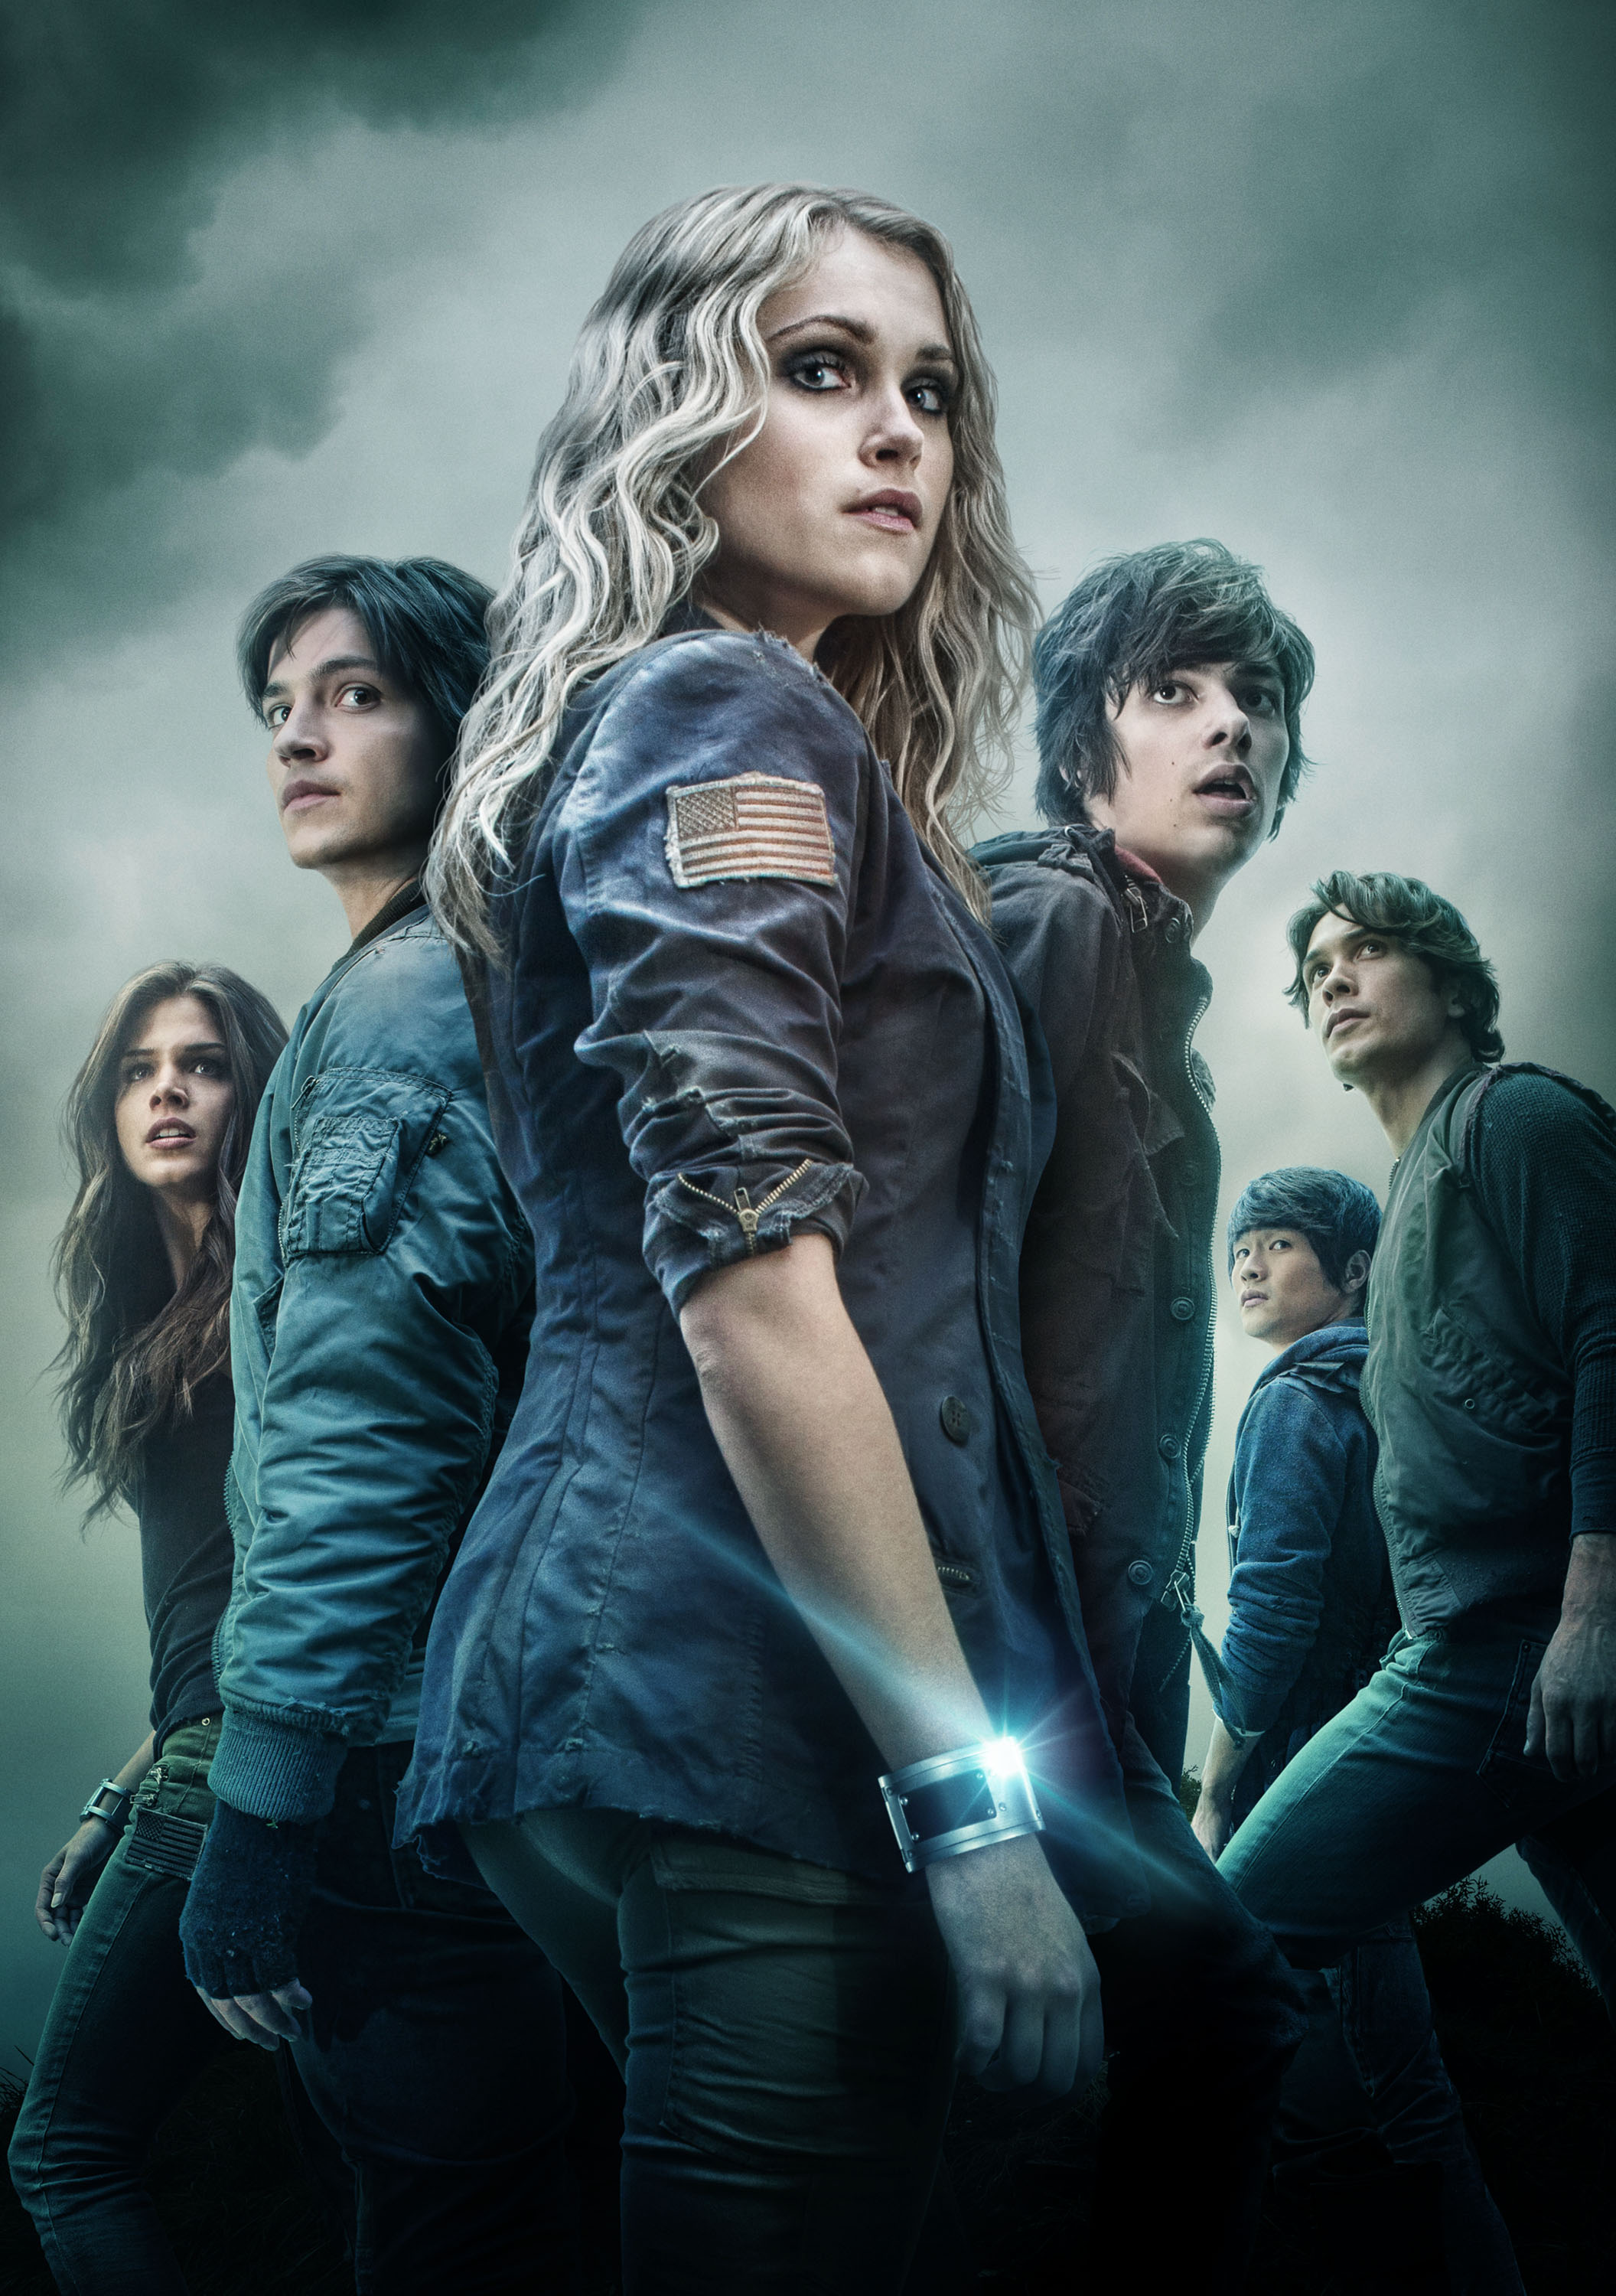 (L-R): Marie Avgeropoulos, Thomas McDonell, Eliza Taylor, Devon Bostick, Chris Larkin and Bob Morley star in the sci-fi drama series THE 100, airing Wednesdays at 9/8c on The CW.